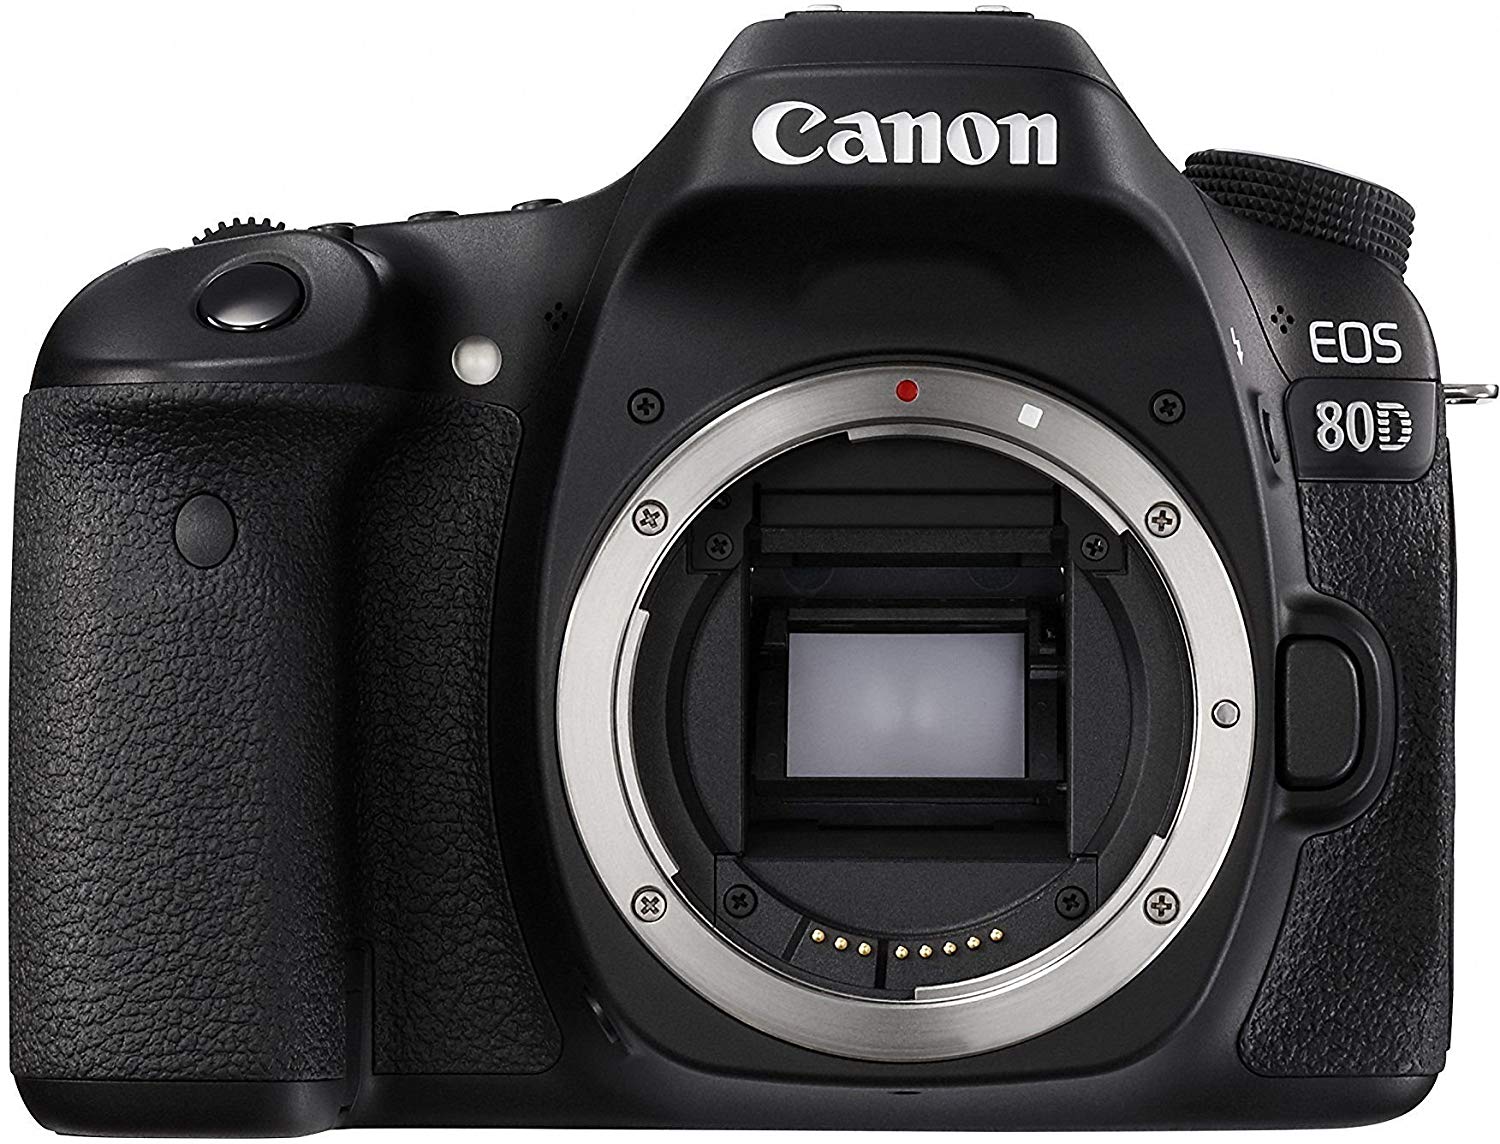 Canon EOS 80D front side without a lens on.